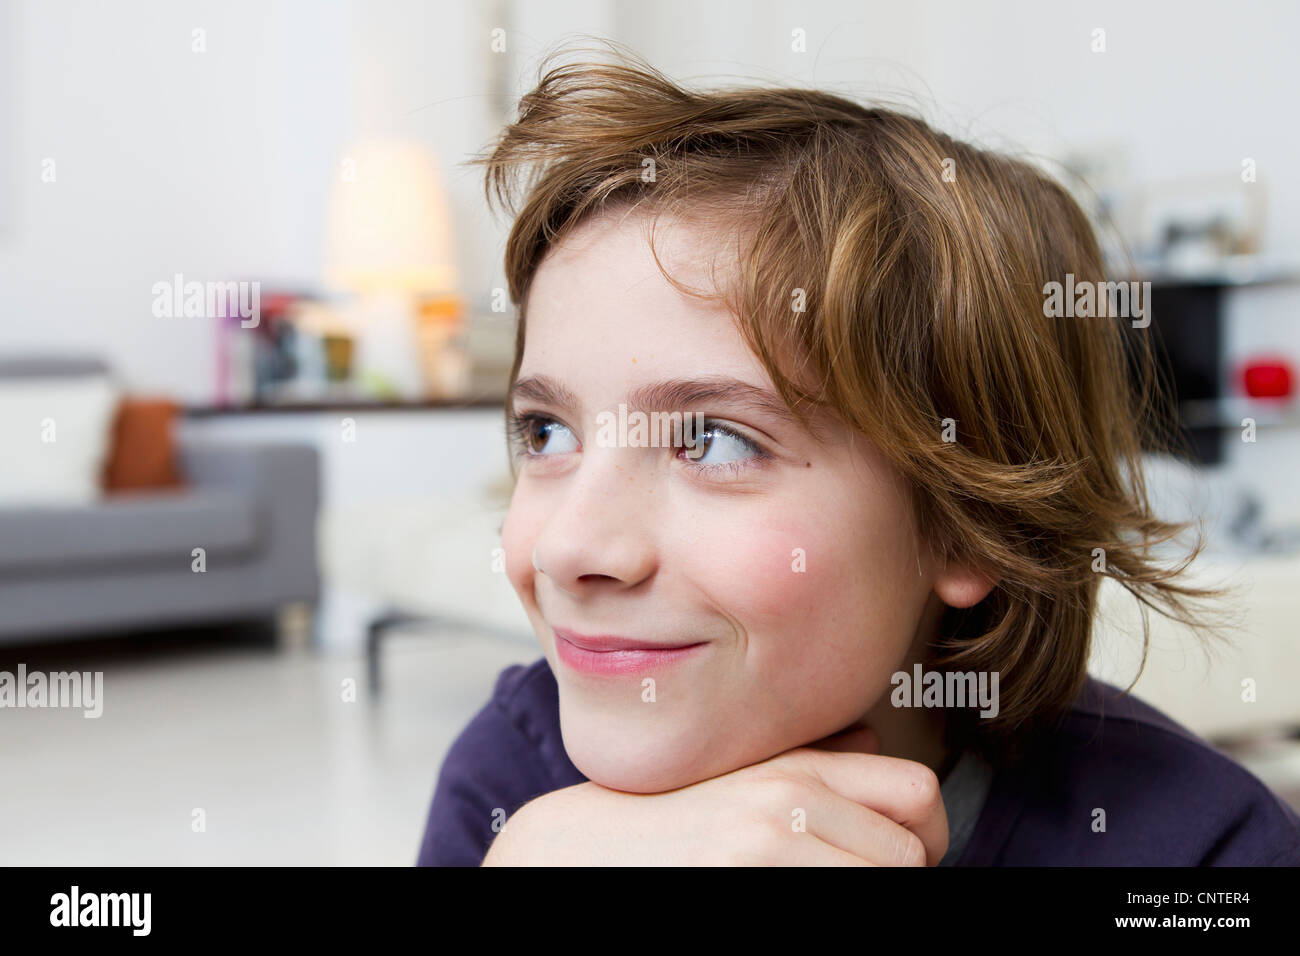 Close up of boys smiling face Stock Photo